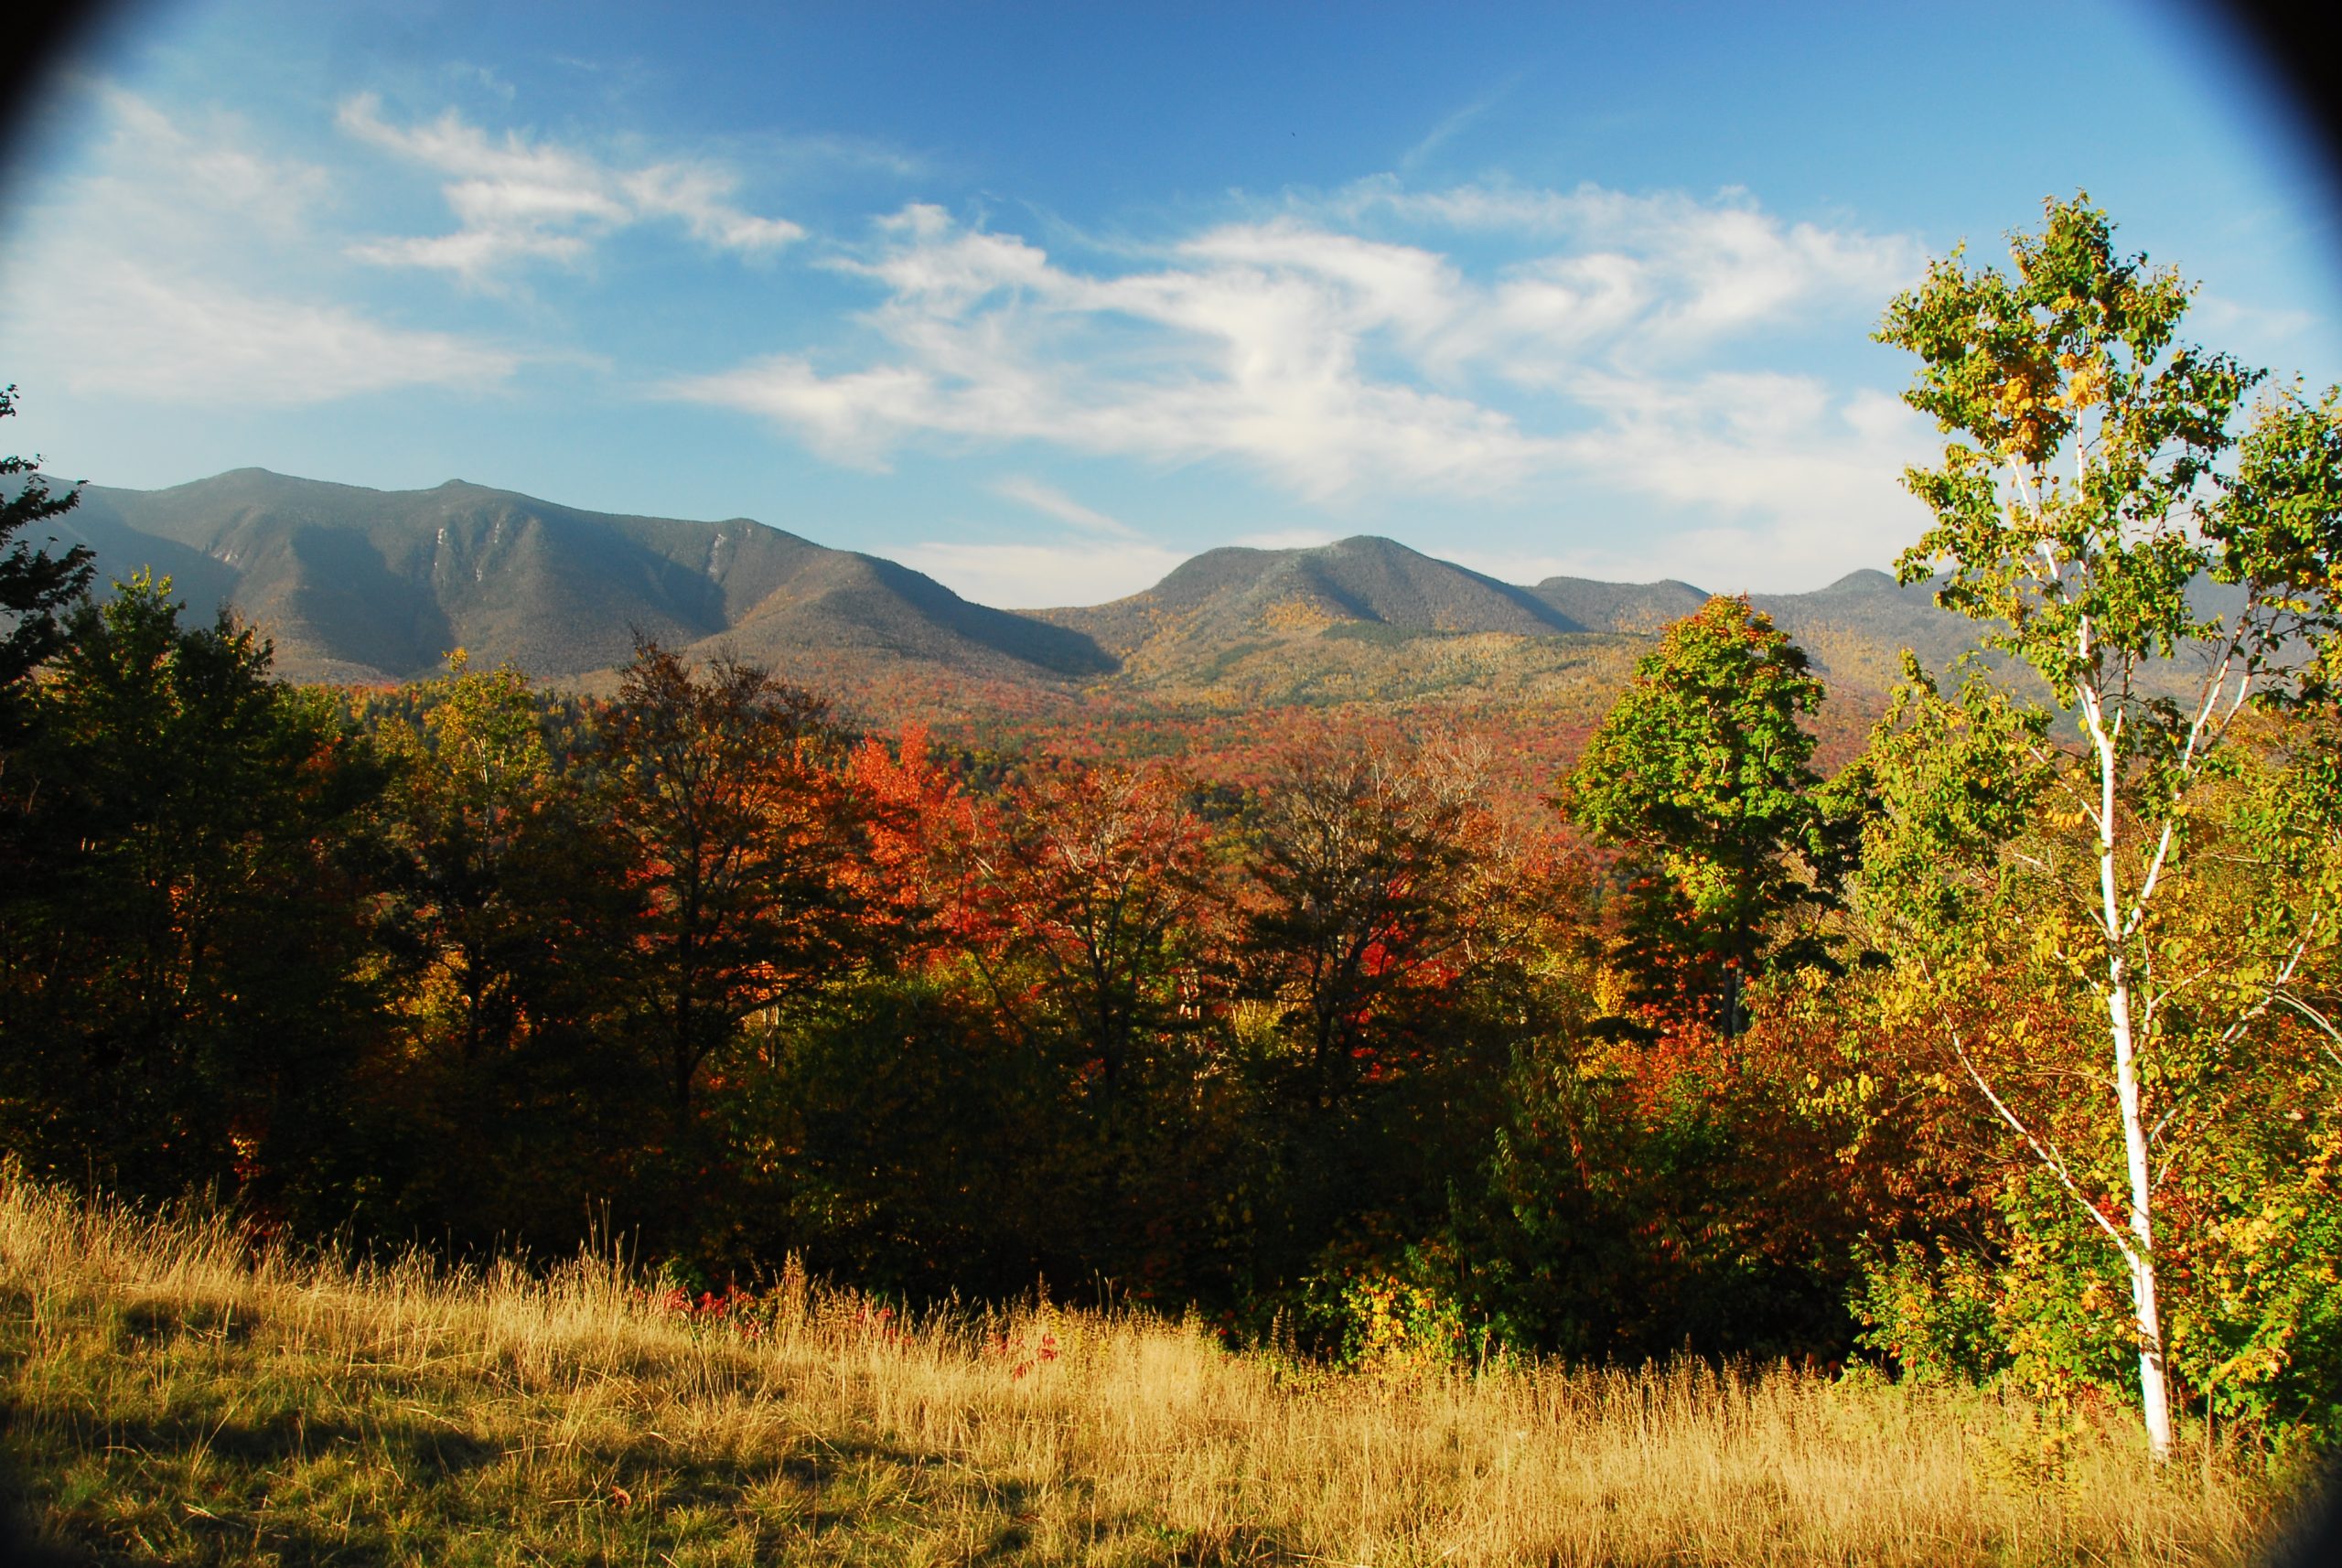 Kancamagus Highway Overlook (user submitted)